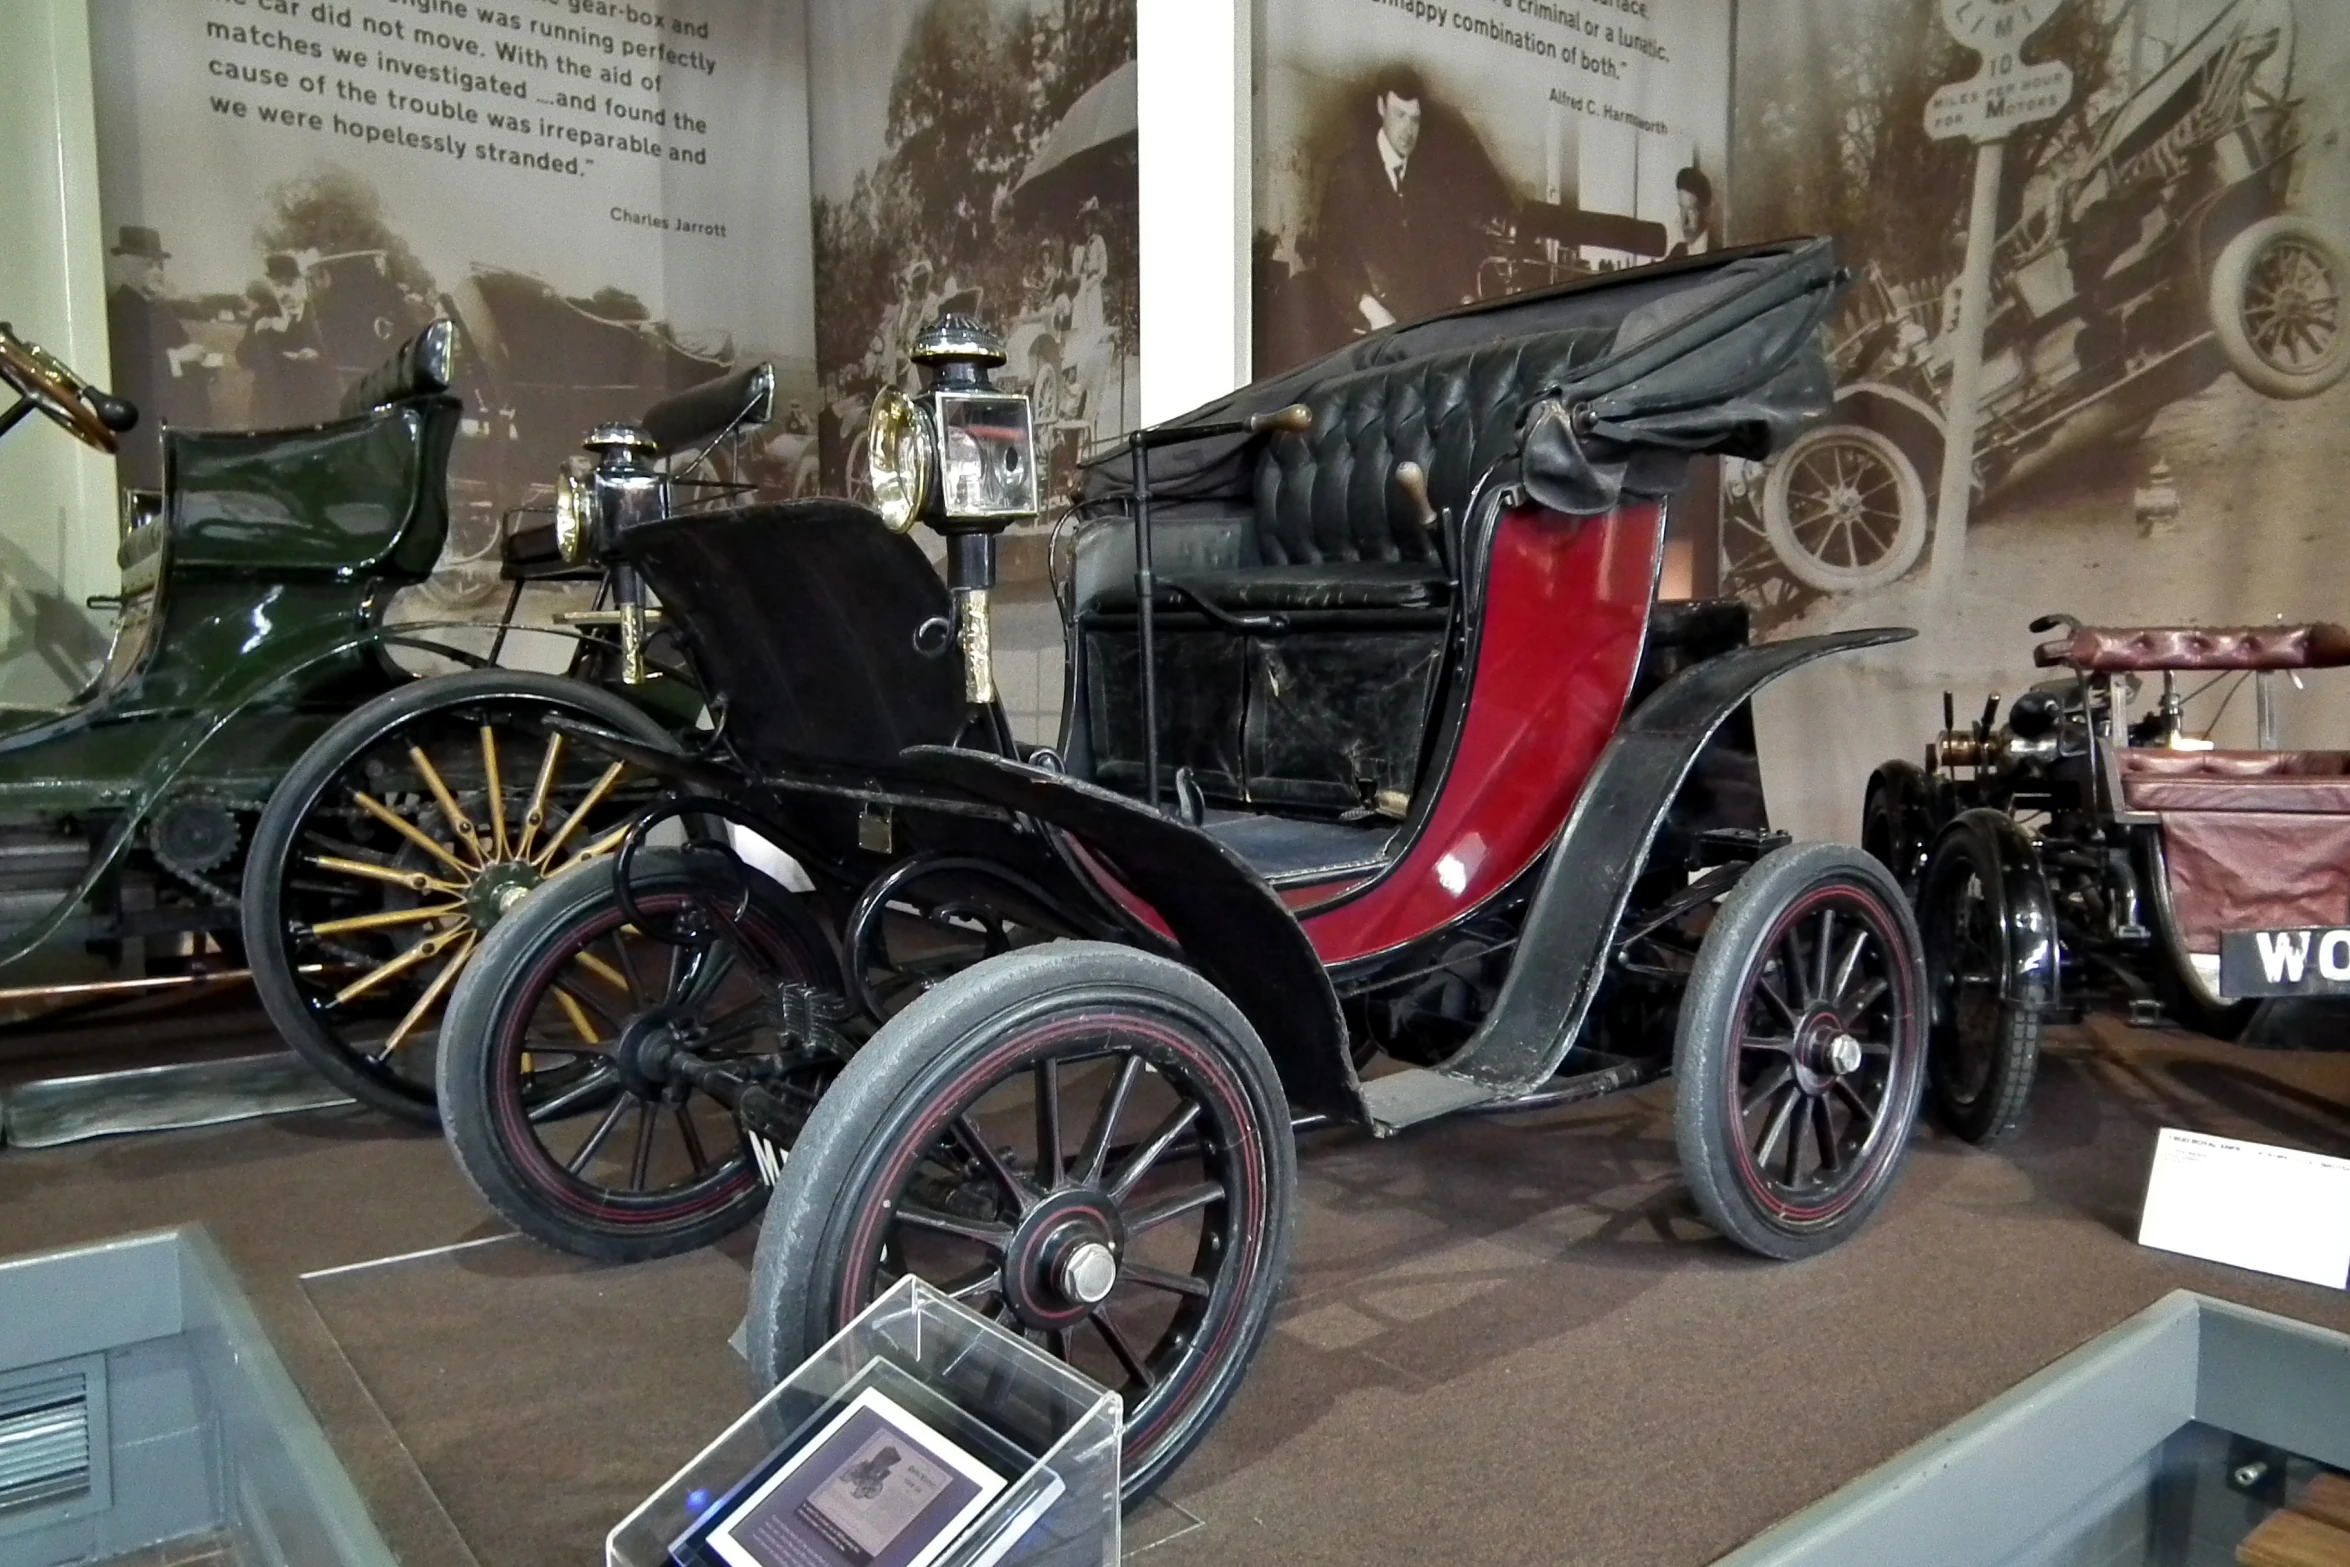 antique cars sit on display in an exhibit